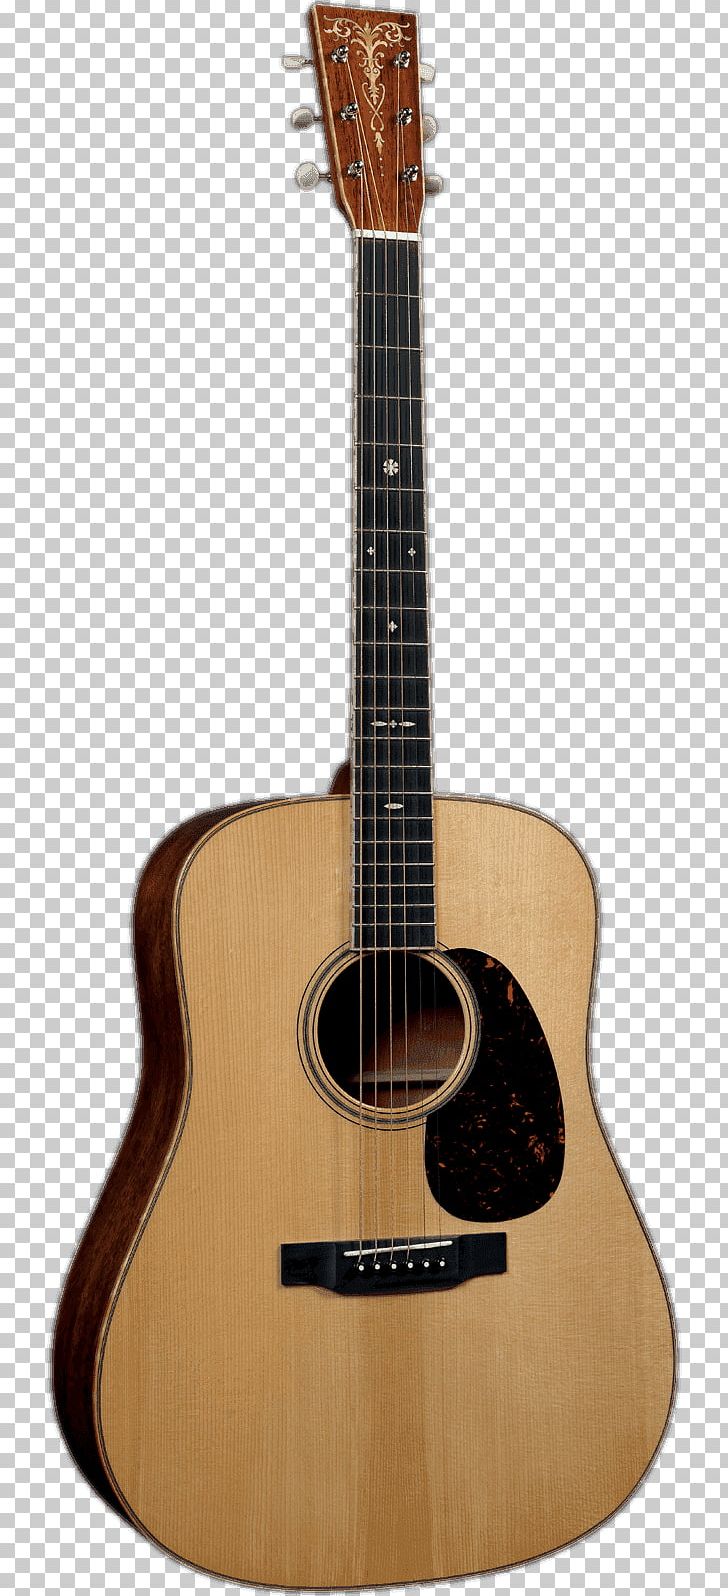 Acoustic-electric Guitar Acoustic Guitar Yamaha Corporation PNG, Clipart, Acoustic Electric Guitar, Acoustic Guitar, Cuatro, Cutaway, Guitar Accessory Free PNG Download